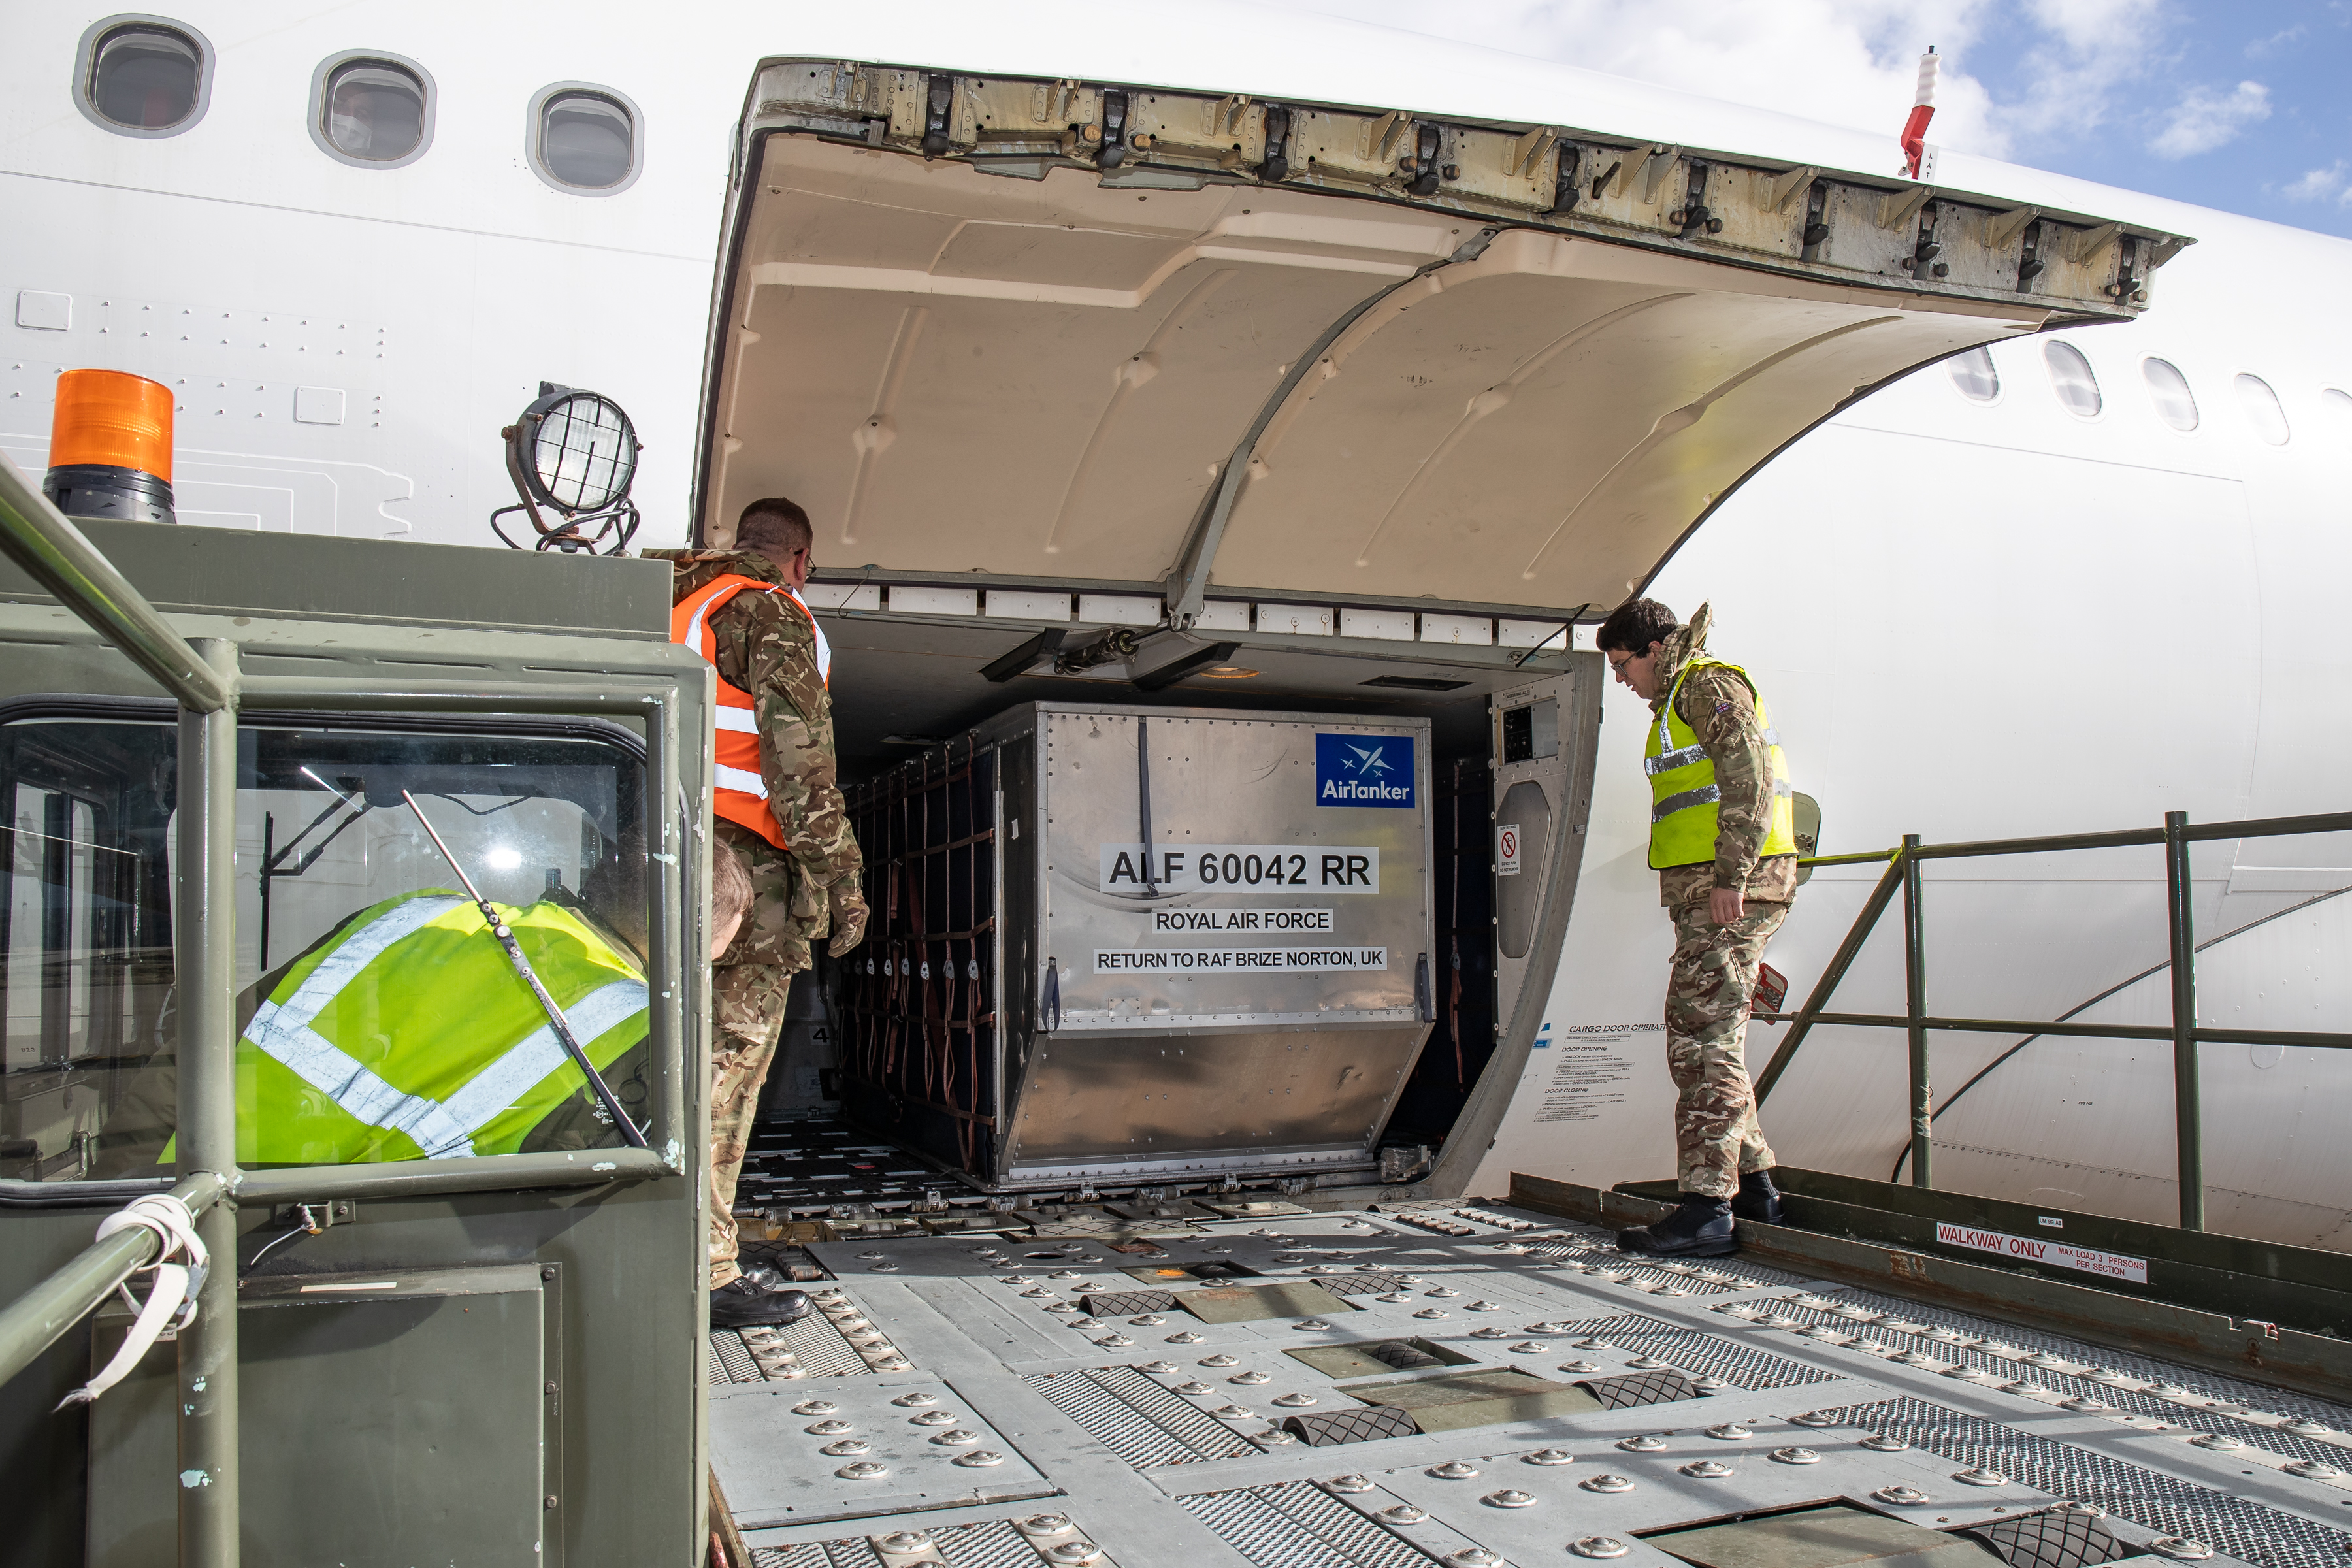 Metal cargo container moved on escalator into carrier aircraft with personnel.